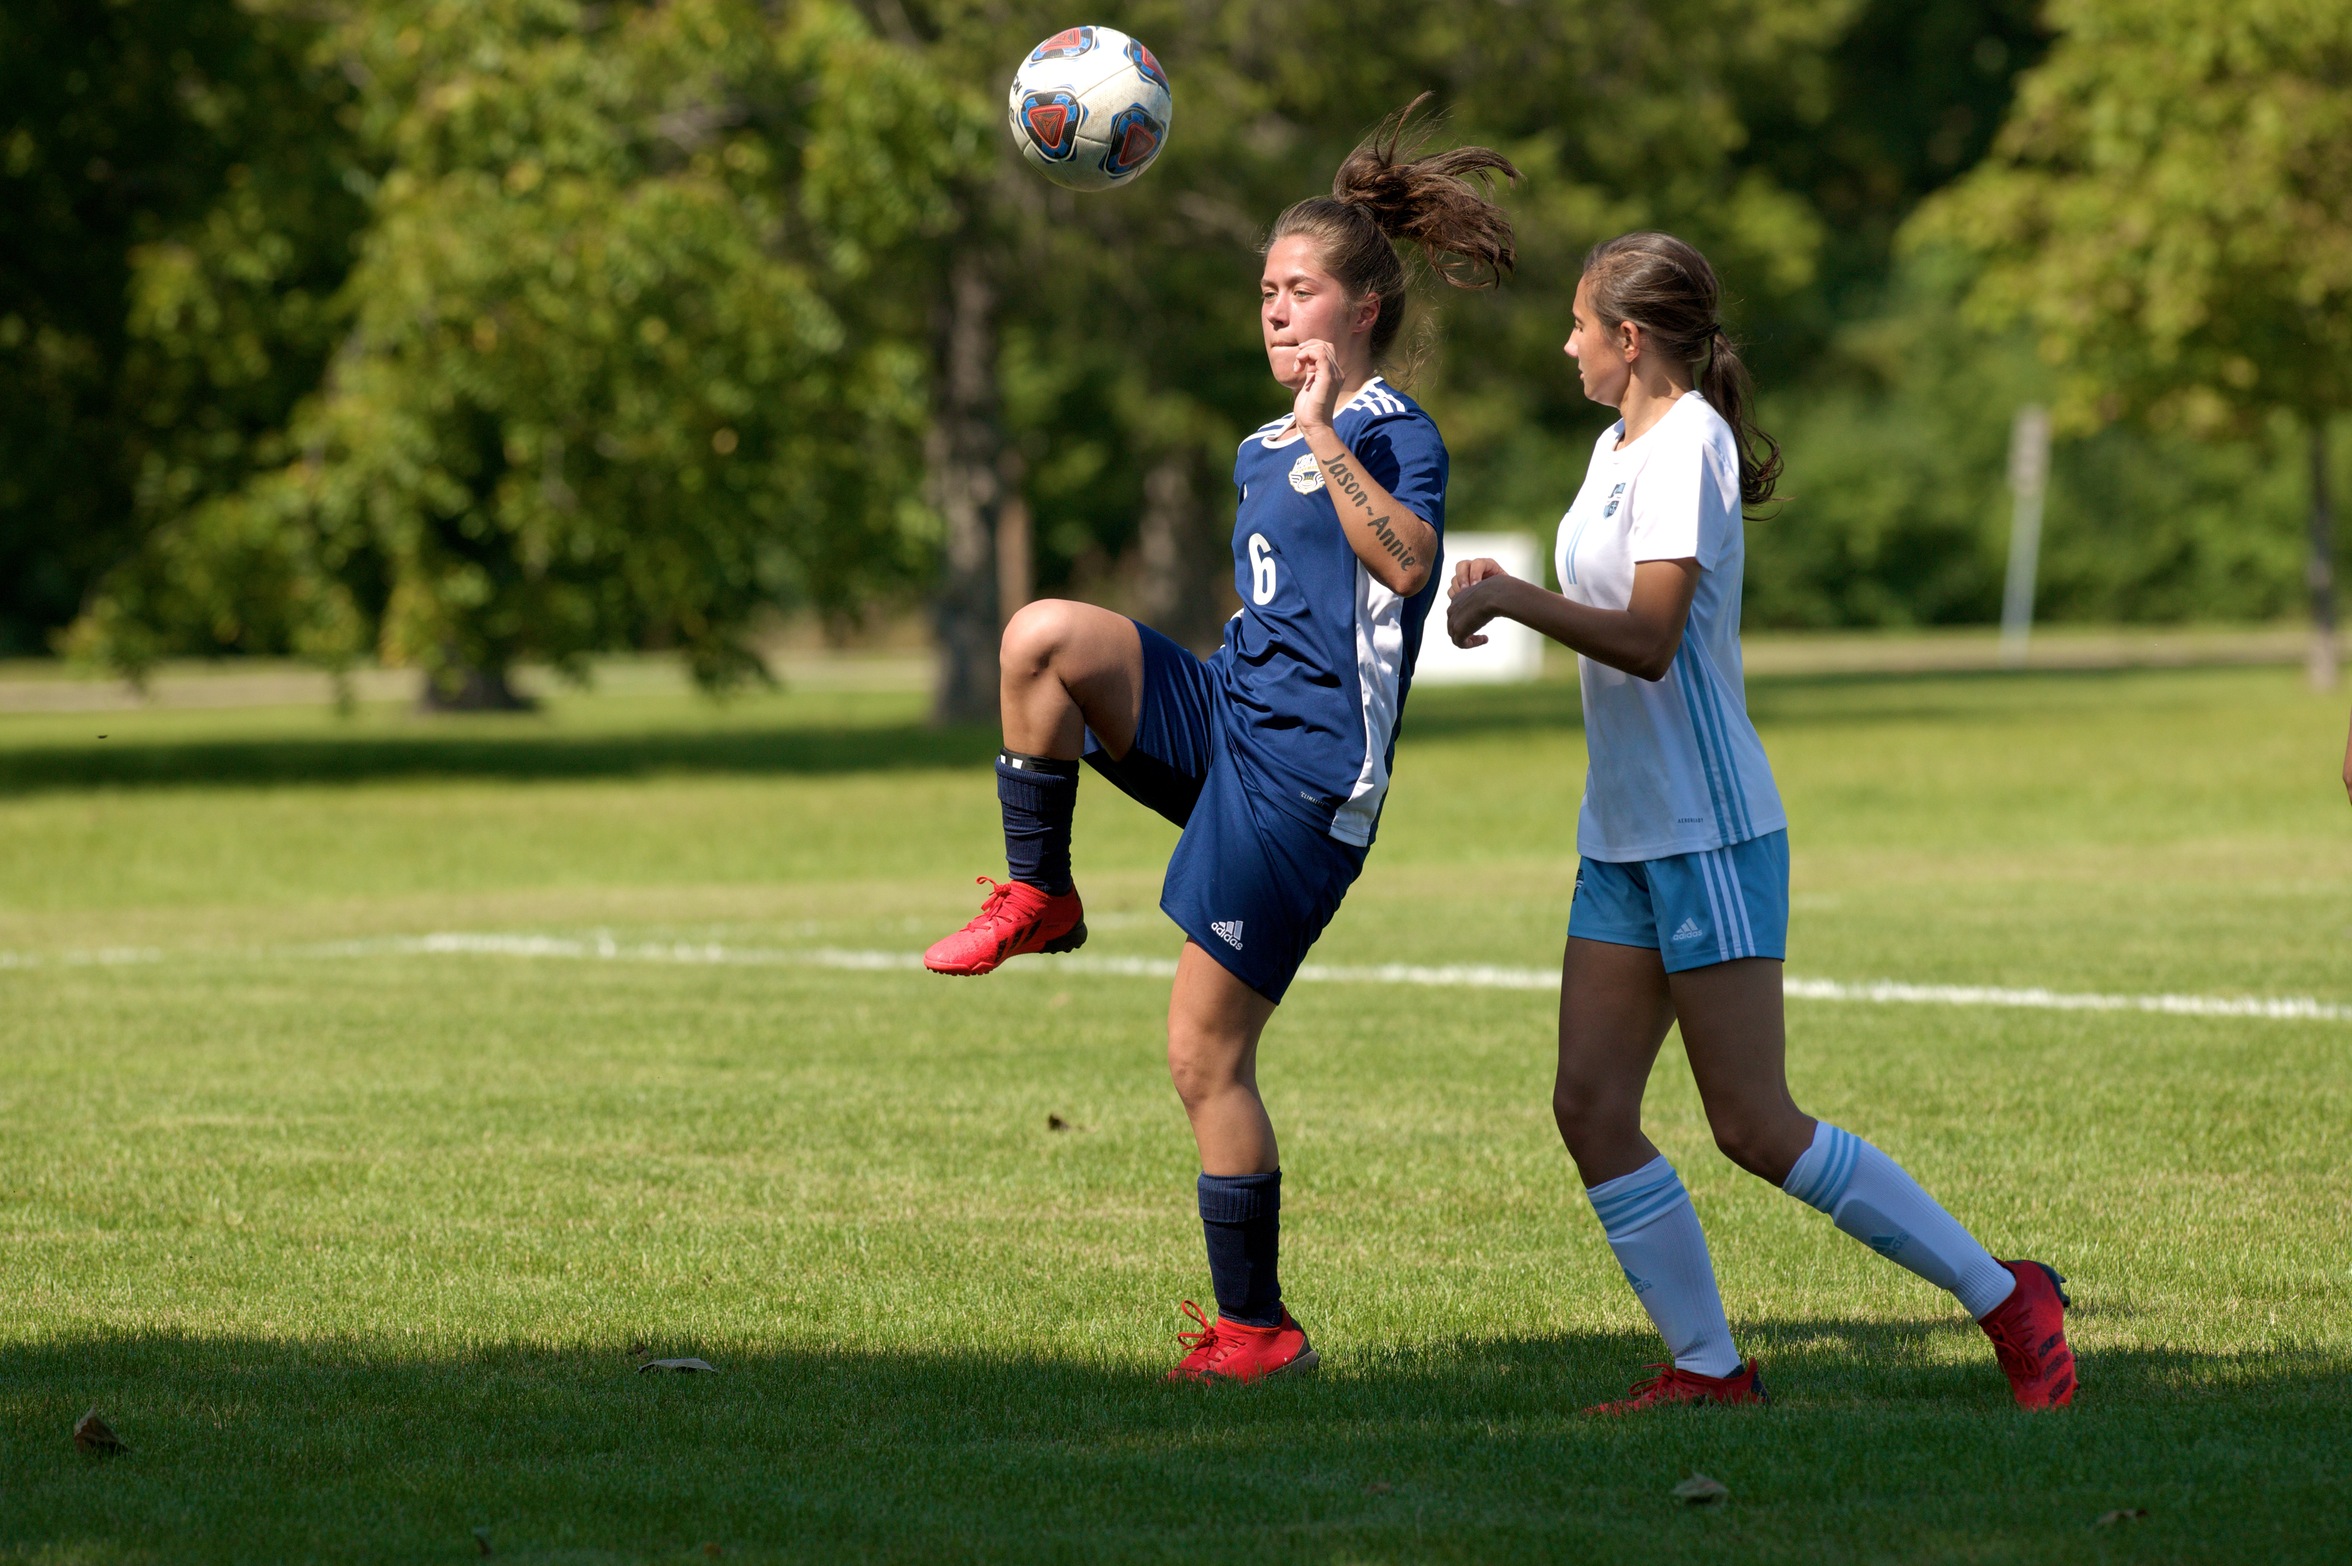 Early Lead Slips Away as Soccer Falls to Andrews